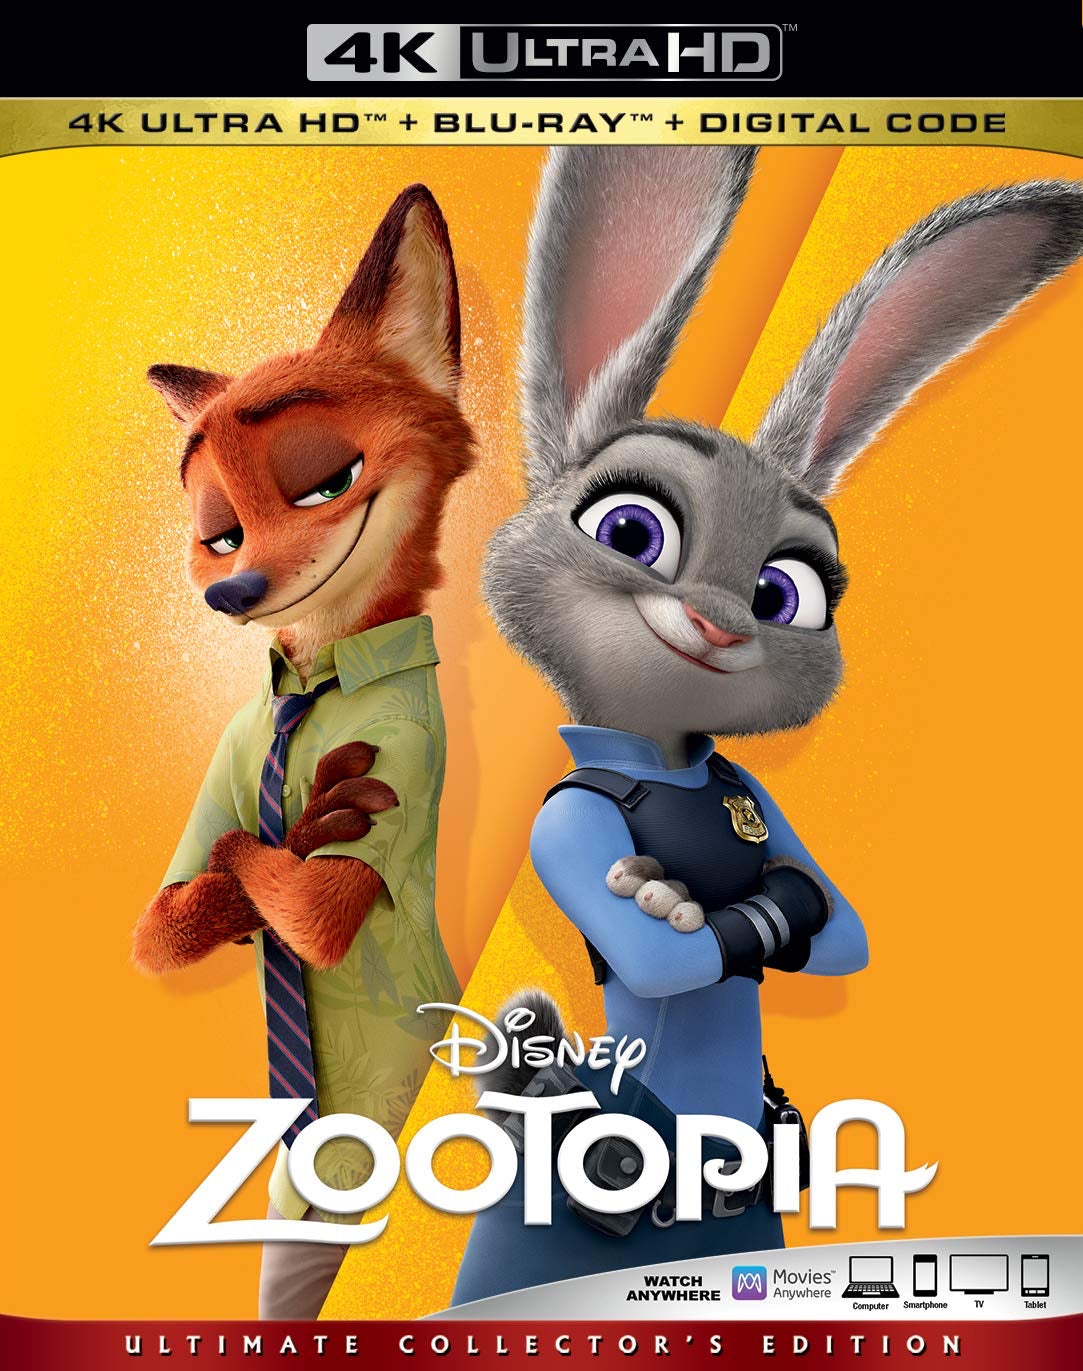 Zootopia (2016) Vudu or Movies Anywhere 4K redemption only